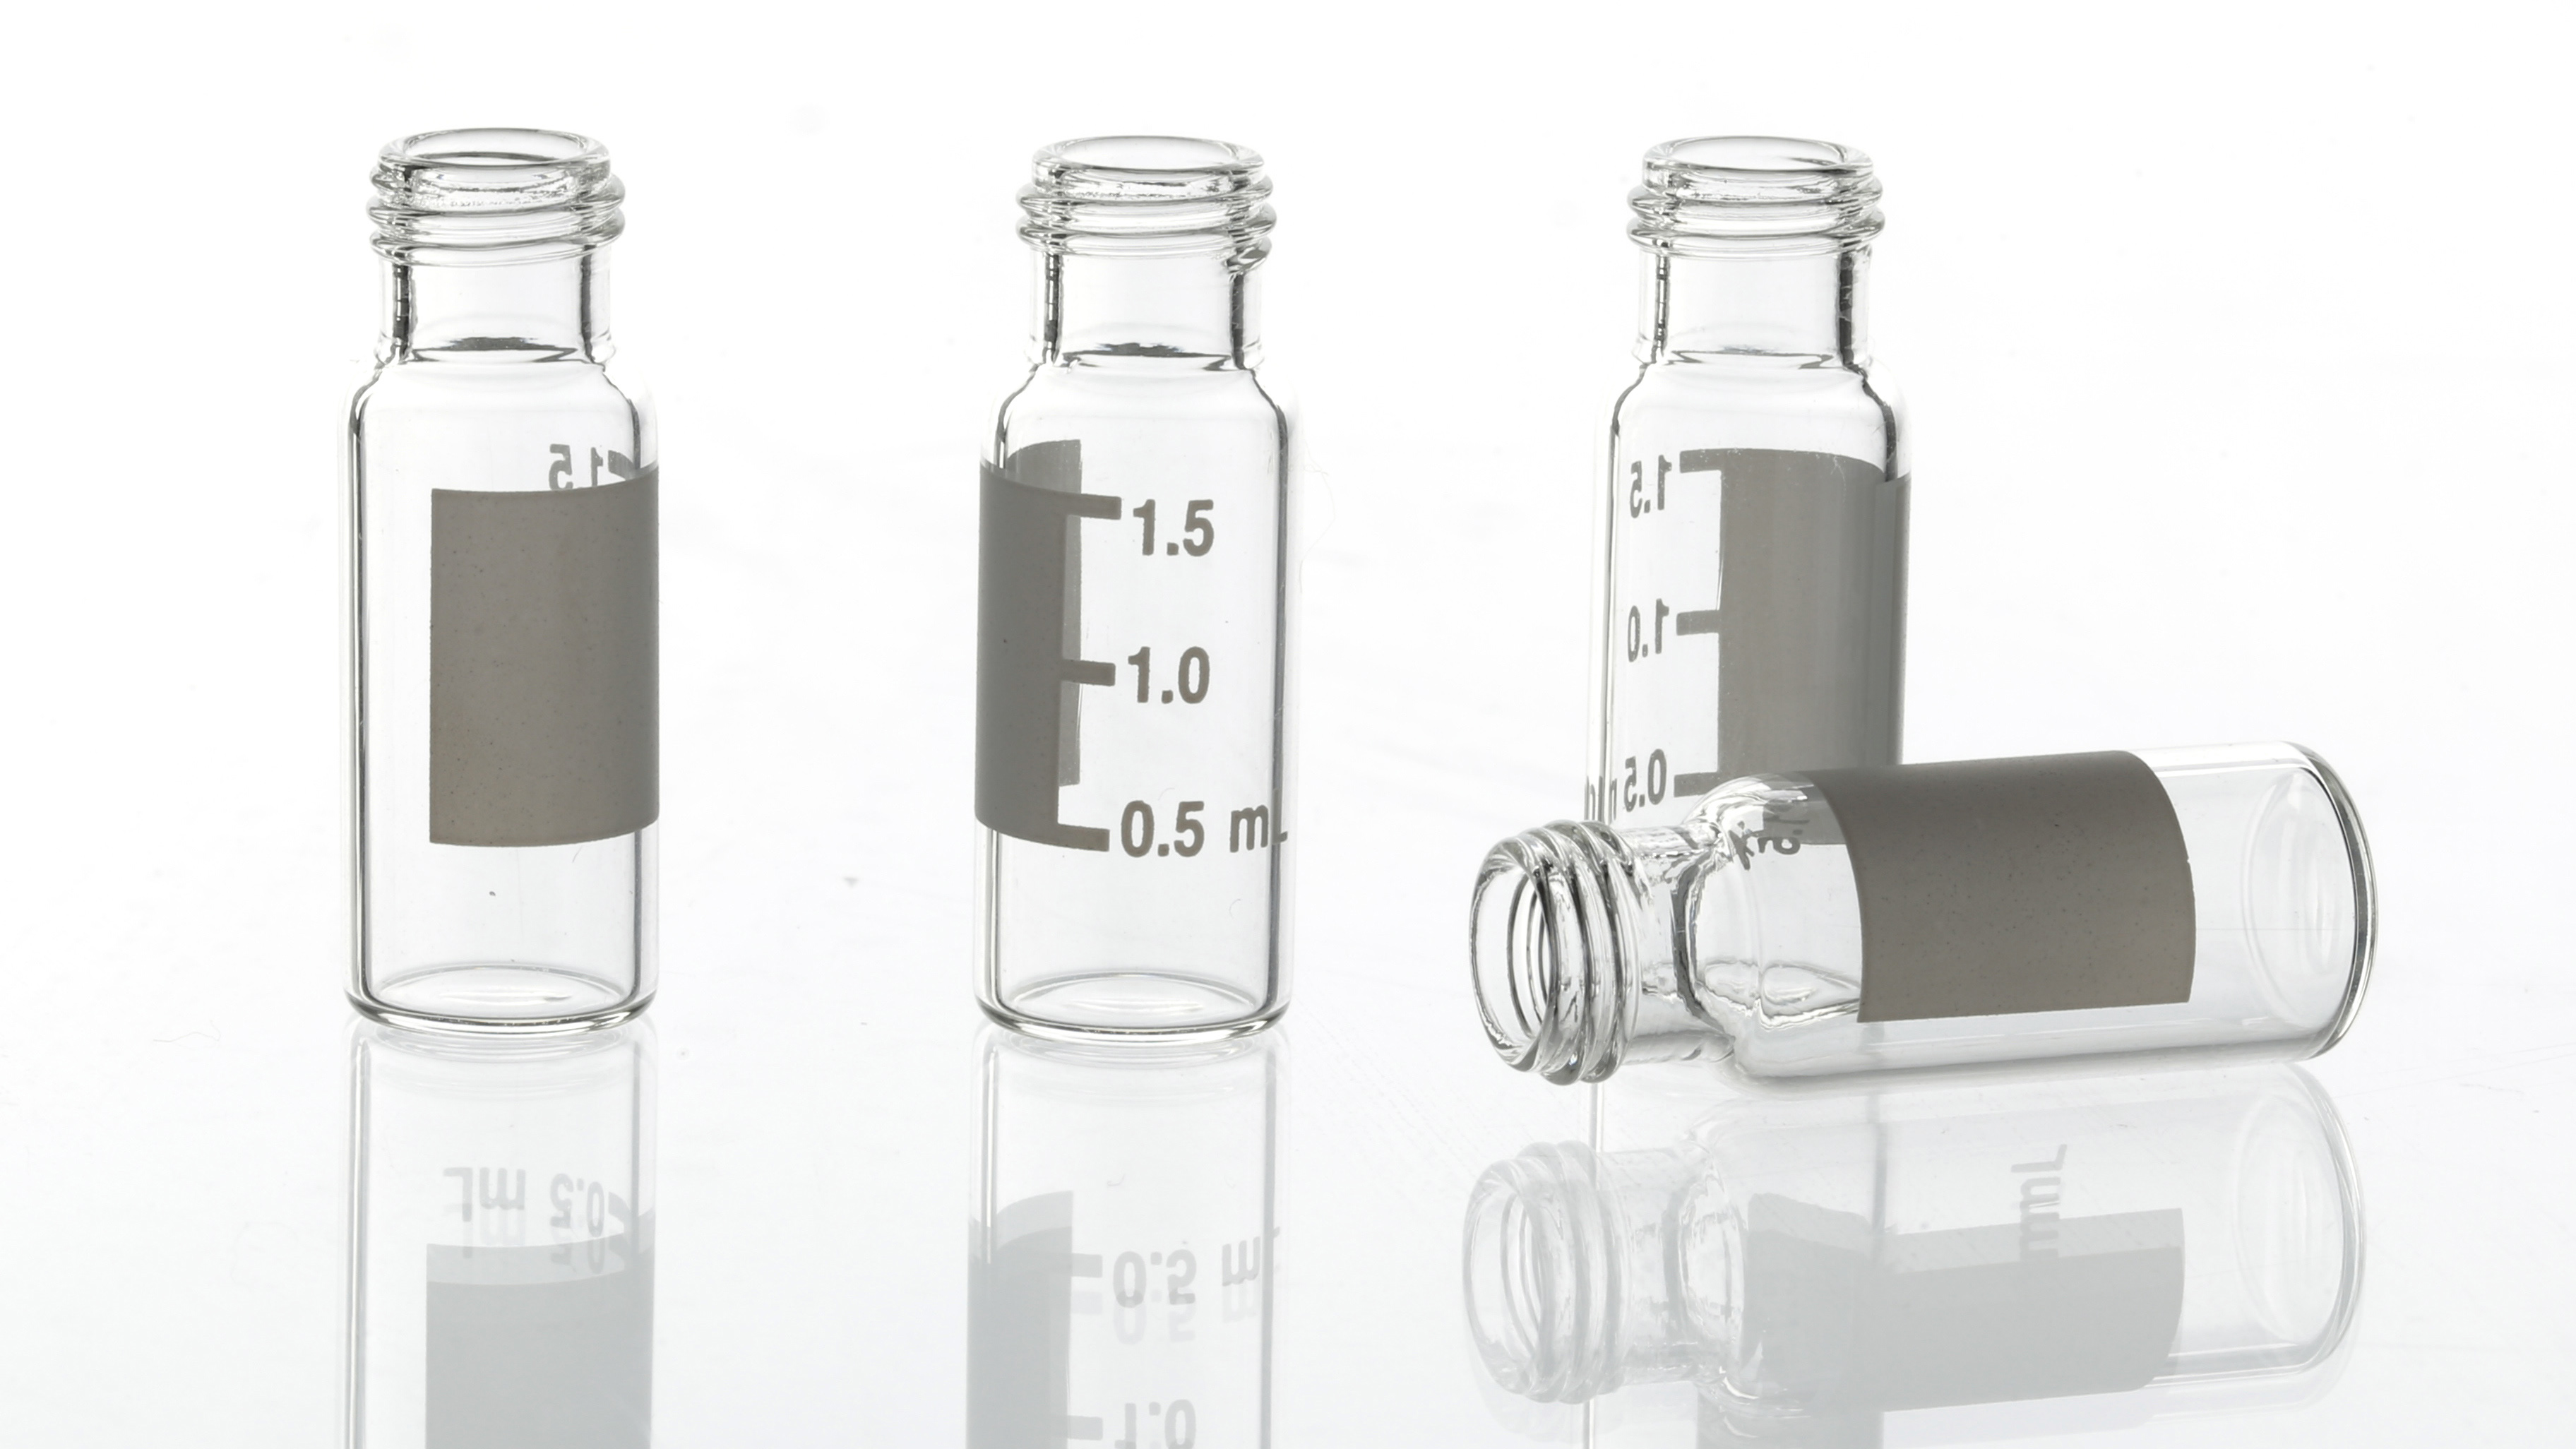 Study on adsorption of a weakly basic compound to glass vials